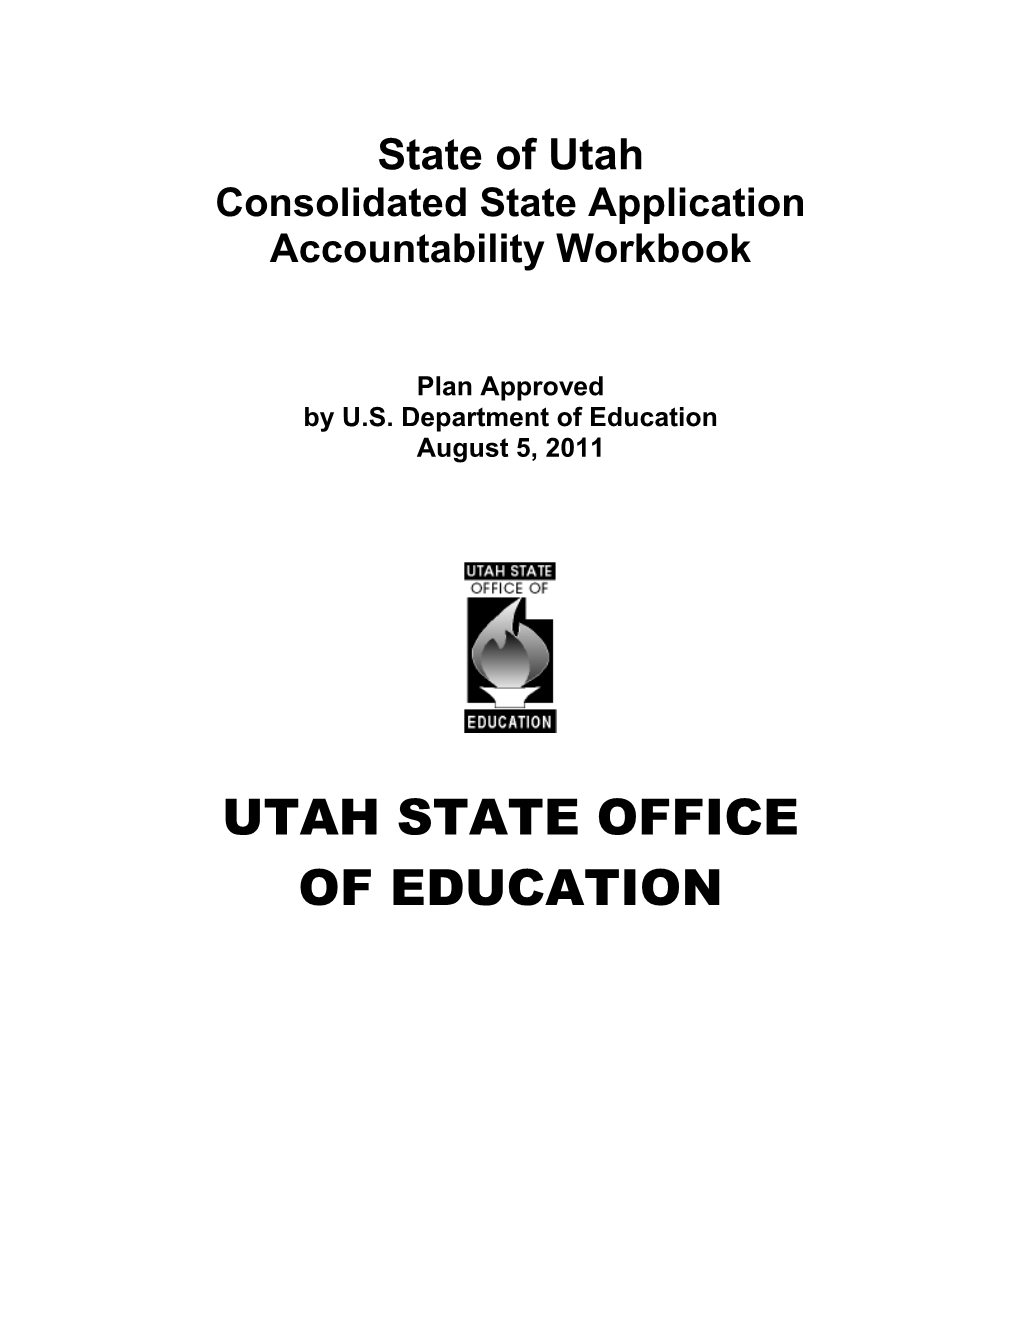 UTAH State Consolidated State Application 8-5-11 (MS WORD)